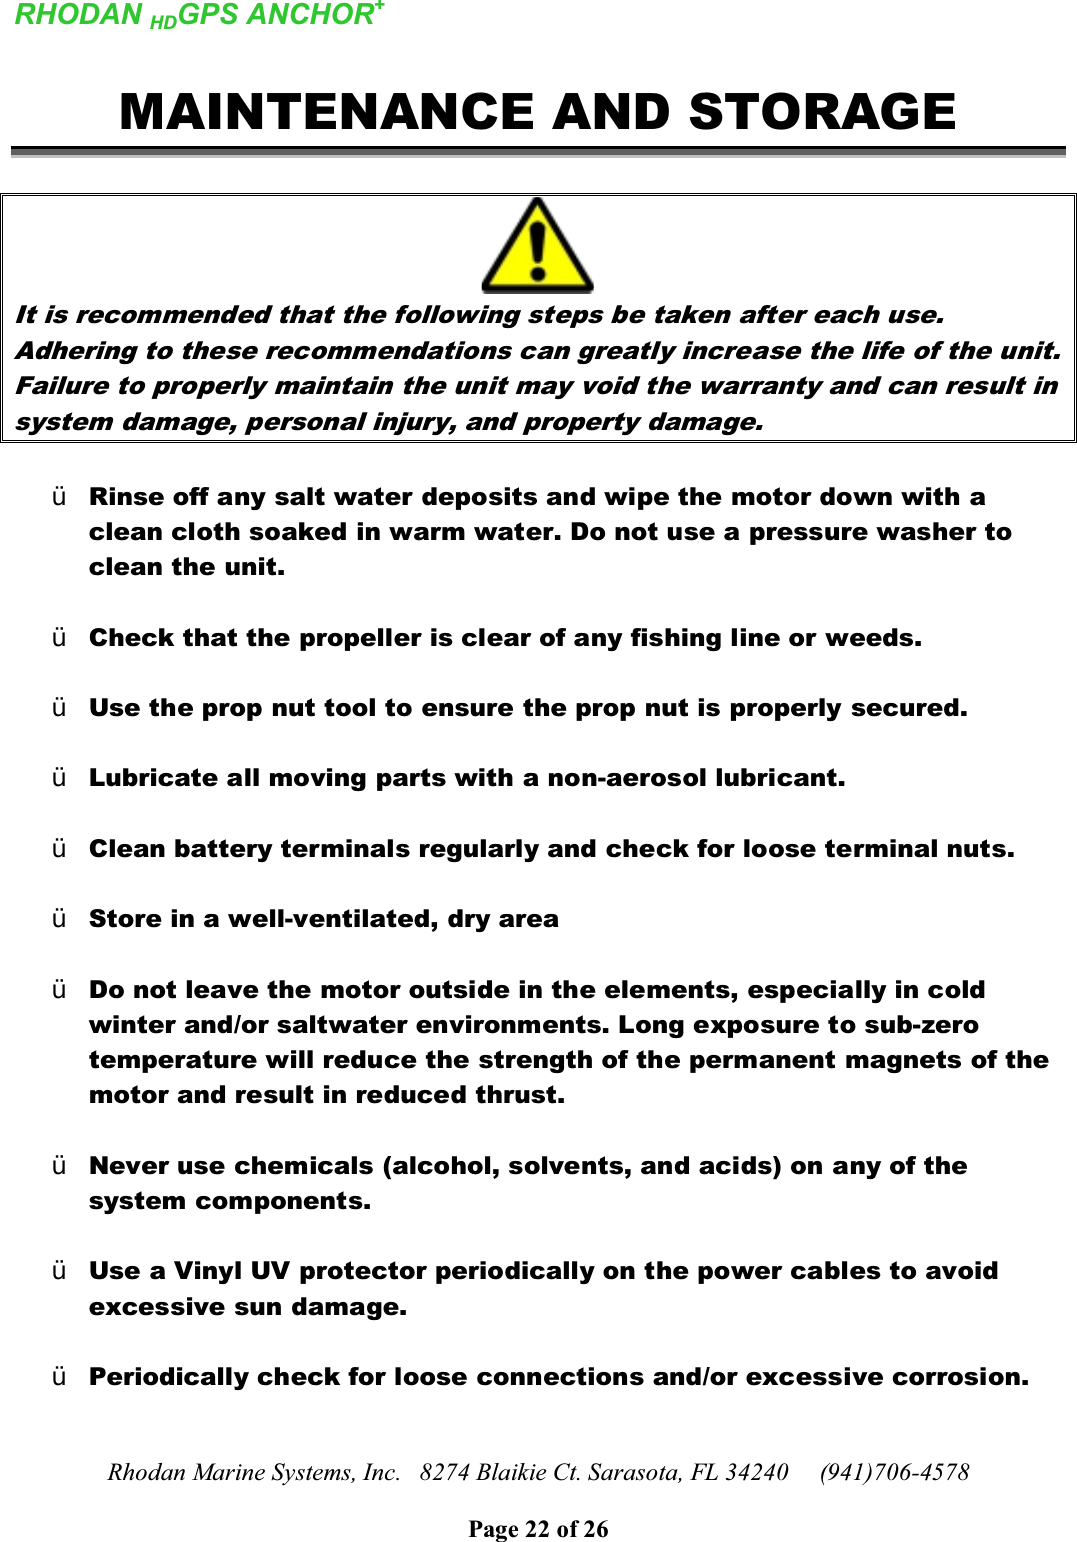 RHODAN HDGPS ANCHOR+Rhodan Marine Systems, Inc.   8274 Blaikie Ct. Sarasota, FL 34240     (941)706-4578Page 22 of 26MAINTENANCE AND STORAGEIt is recommended that the following steps be taken after each use. Adhering to these recommendations can greatly increase the life of the unit. Failure to properly maintain the unit may void the warranty and can result in system damage, personal injury, and property damage.¾Rinse off any salt water deposits and wipe the motor down with a clean cloth soaked in warm water. Do not use a pressure washer to clean the unit. ¾Check that the propeller is clear of any fishing line or weeds.¾Use the prop nut tool to ensure the prop nut is properly secured.¾Lubricate all moving parts with a non-aerosol lubricant.¾Clean battery terminals regularly and check for loose terminal nuts.¾Store in a well-ventilated, dry area¾Do not leave the motor outside in the elements, especially in cold winter and/or saltwater environments. Long exposure to sub-zero temperature will reduce the strength of the permanent magnets of the motor and result in reduced thrust.¾Never use chemicals (alcohol, solvents, and acids) on any of the system components. ¾Use a Vinyl UV protector periodically on the power cables to avoid excessive sun damage. ¾Periodically check for loose connections and/or excessive corrosion.